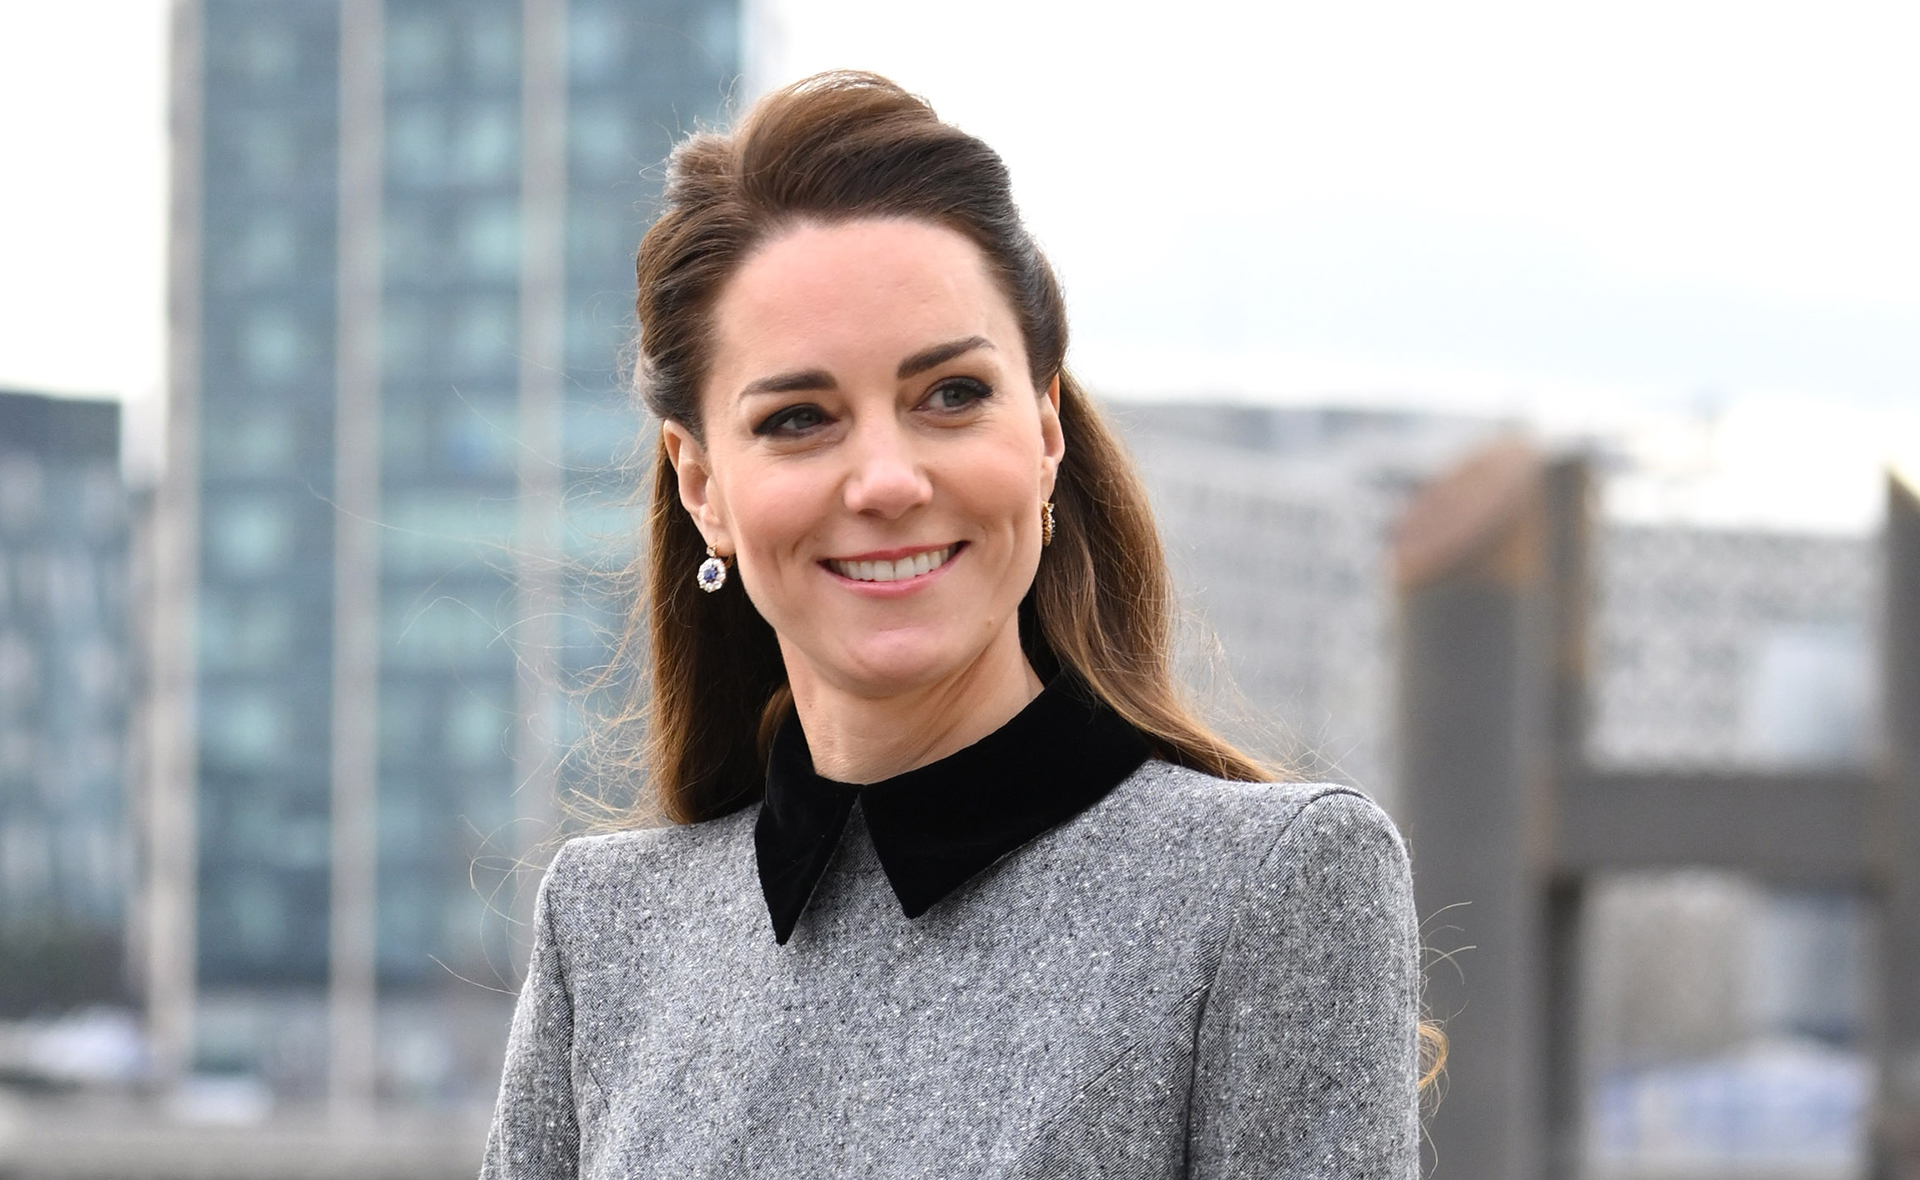 Catherine, Duchess of Cambridge’s outfit steals the show at a special royal outing 10 years in the making